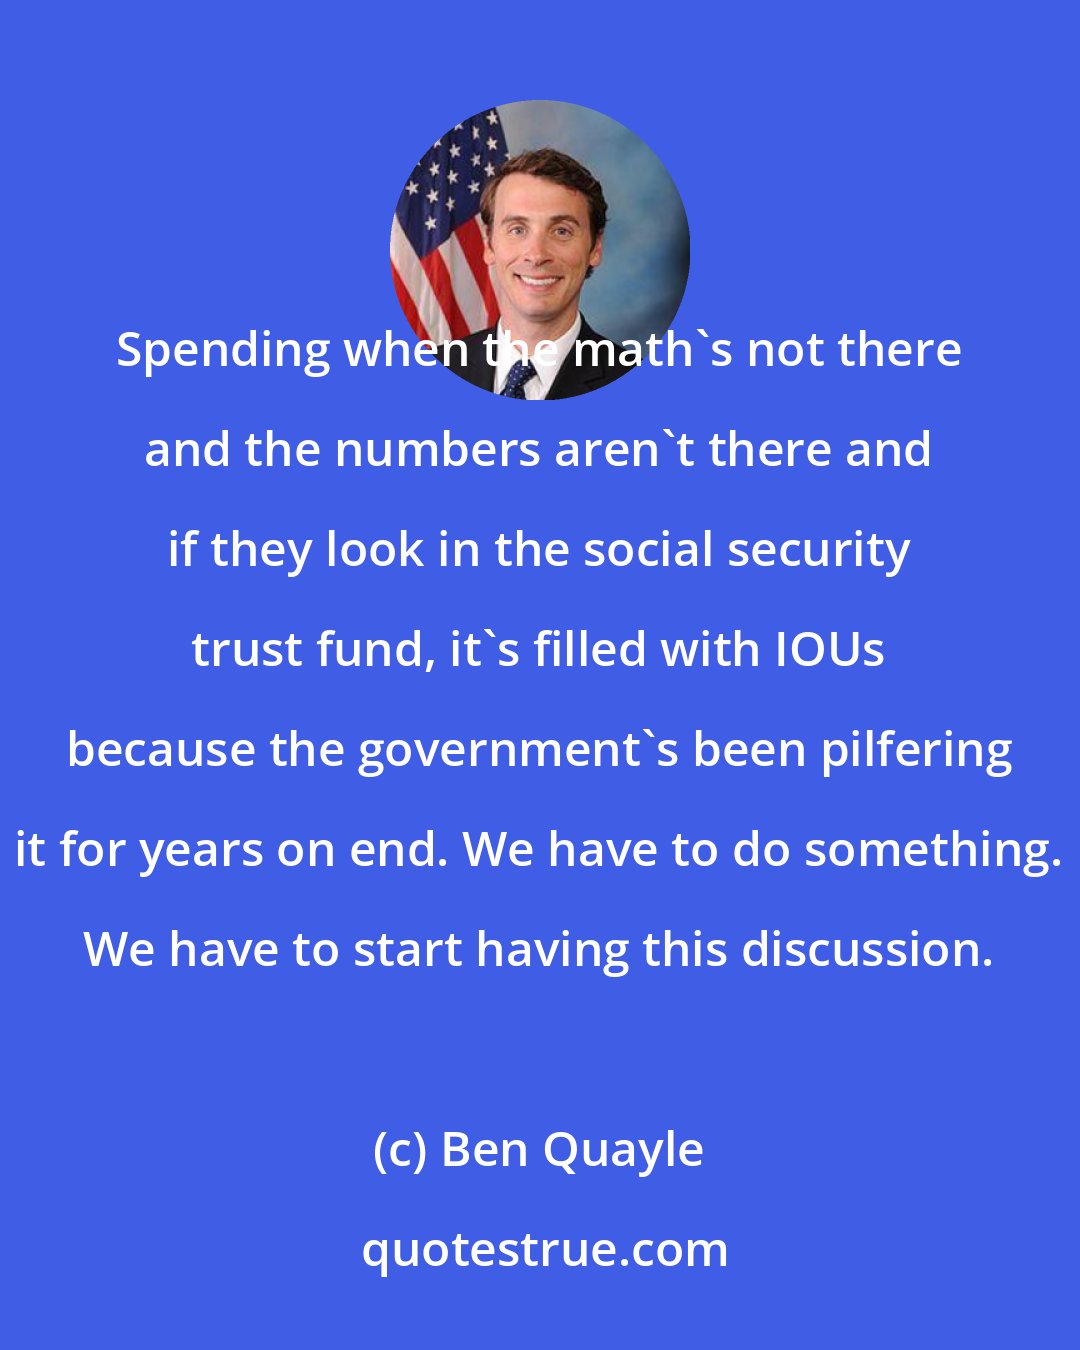 Ben Quayle: Spending when the math's not there and the numbers aren't there and if they look in the social security trust fund, it's filled with IOUs because the government's been pilfering it for years on end. We have to do something. We have to start having this discussion.